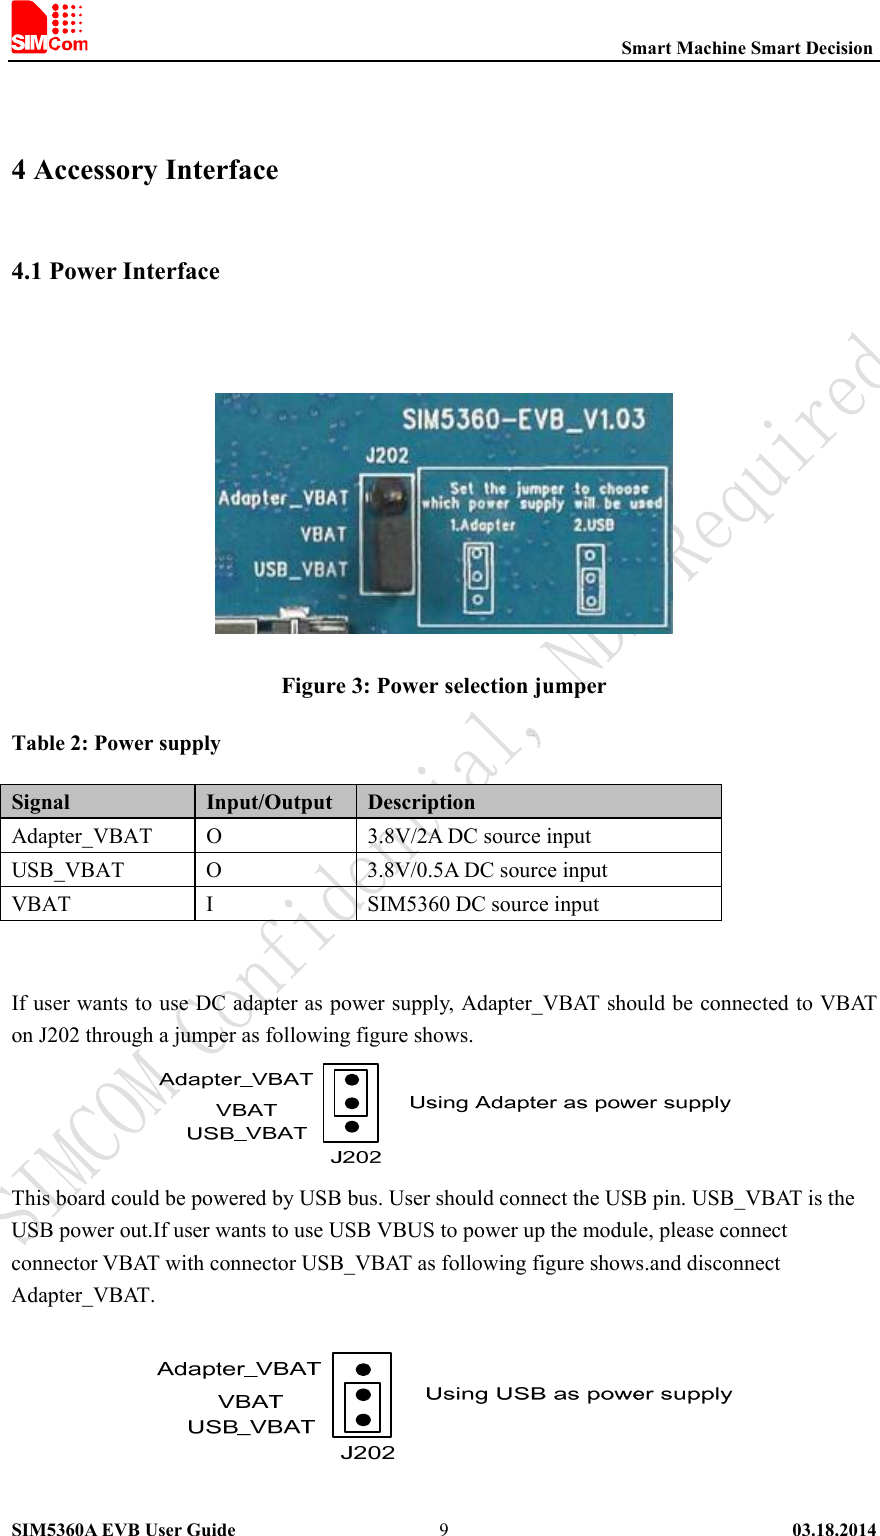                                                          Smart Machine Smart Decision SIM5360A EVB User Guide   03.18.2014   9 4 Accessory Interface 4.1 Power Interface     Figure 3: Power selection jumper Table 2: Power supply Signal  Input/Output  Description Adapter_VBAT  O  3.8V/2A DC source input   USB_VBAT  O  3.8V/0.5A DC source input VBAT  I  SIM5360 DC source input   If user wants to use DC adapter as power supply, Adapter_VBAT should be connected to VBAT on J202 through a jumper as following figure shows.    This board could be powered by USB bus. User should connect the USB pin. USB_VBAT is the USB power out.If user wants to use USB VBUS to power up the module, please connect connector VBAT with connector USB_VBAT as following figure shows.and disconnect Adapter_VBAT.   